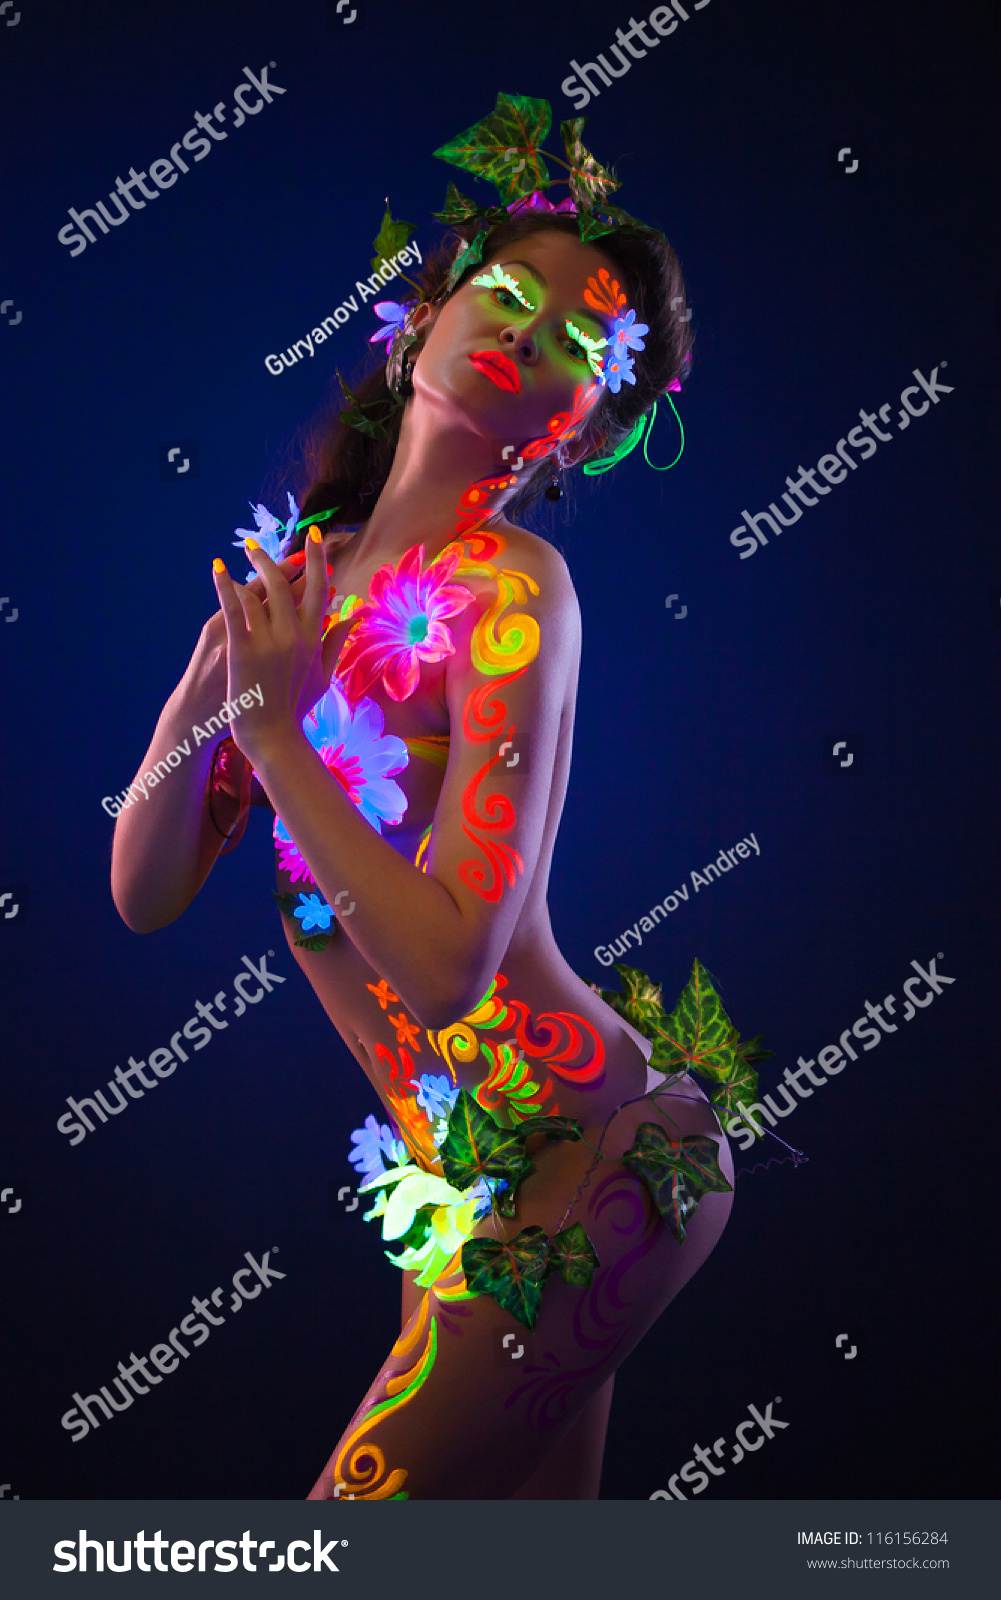 Beautiful Flowers In UV Light On A Young Girl Face And 